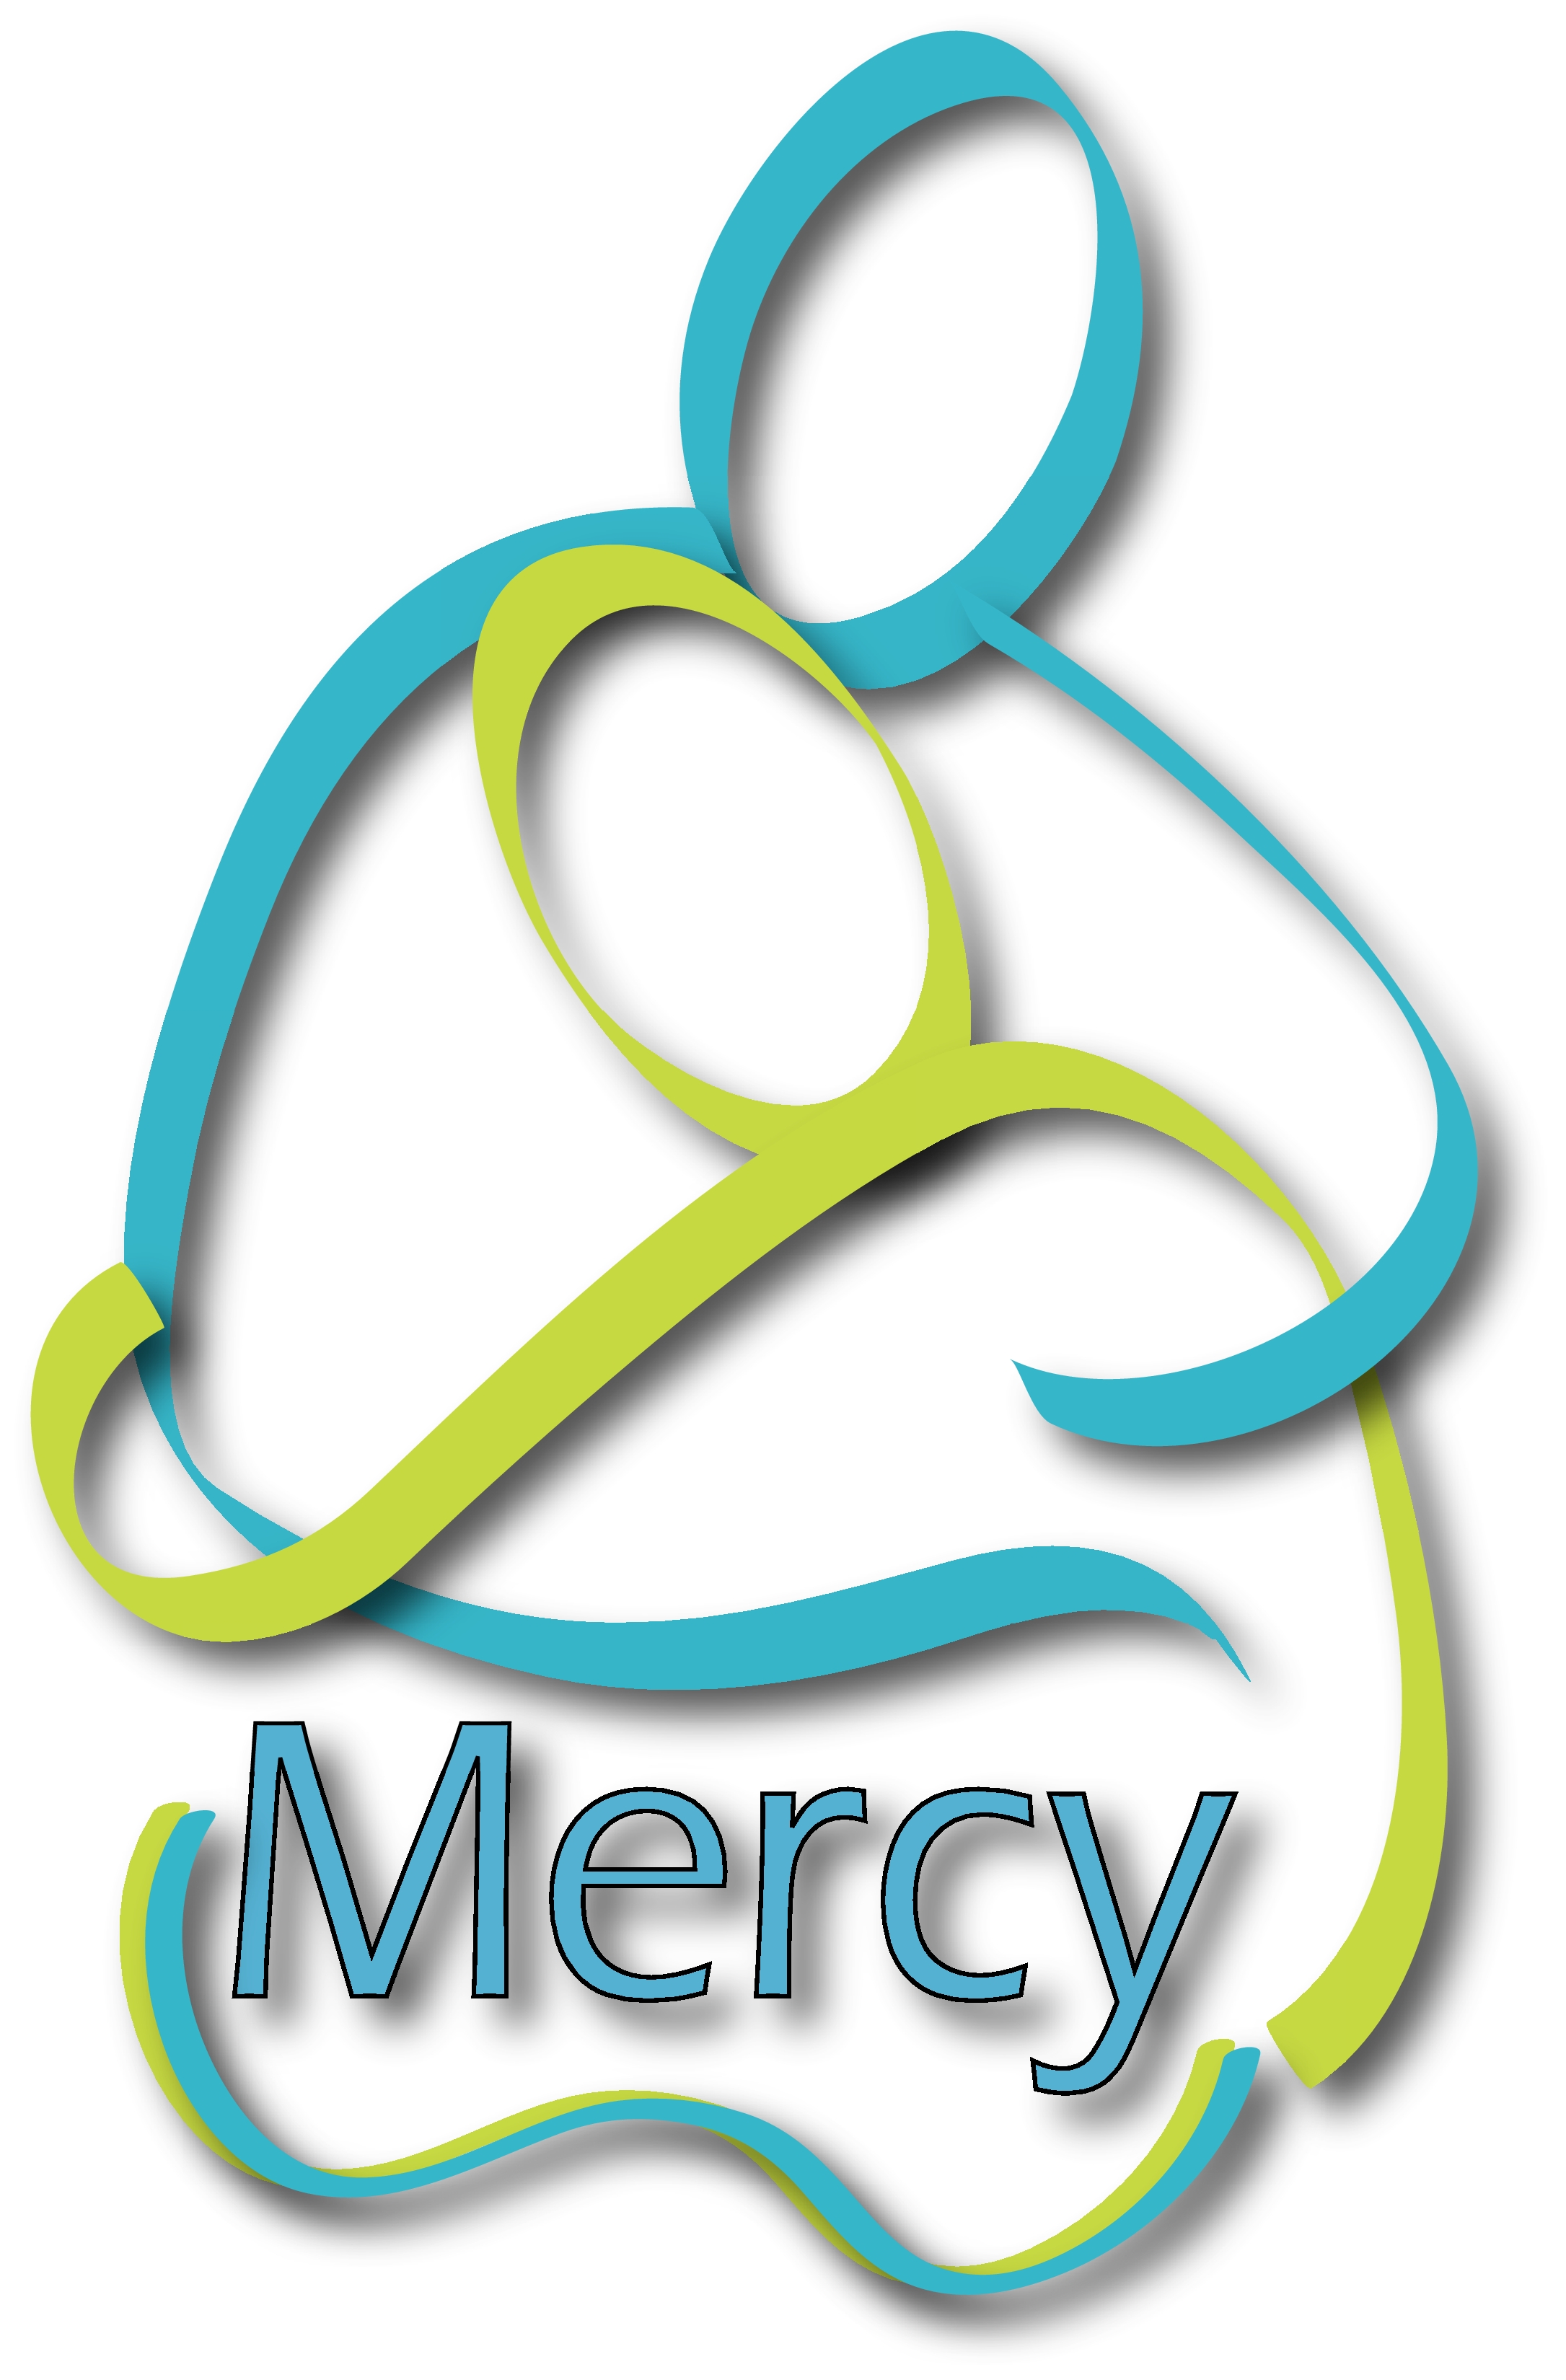 divine mercy image clipart - Clip Art Library